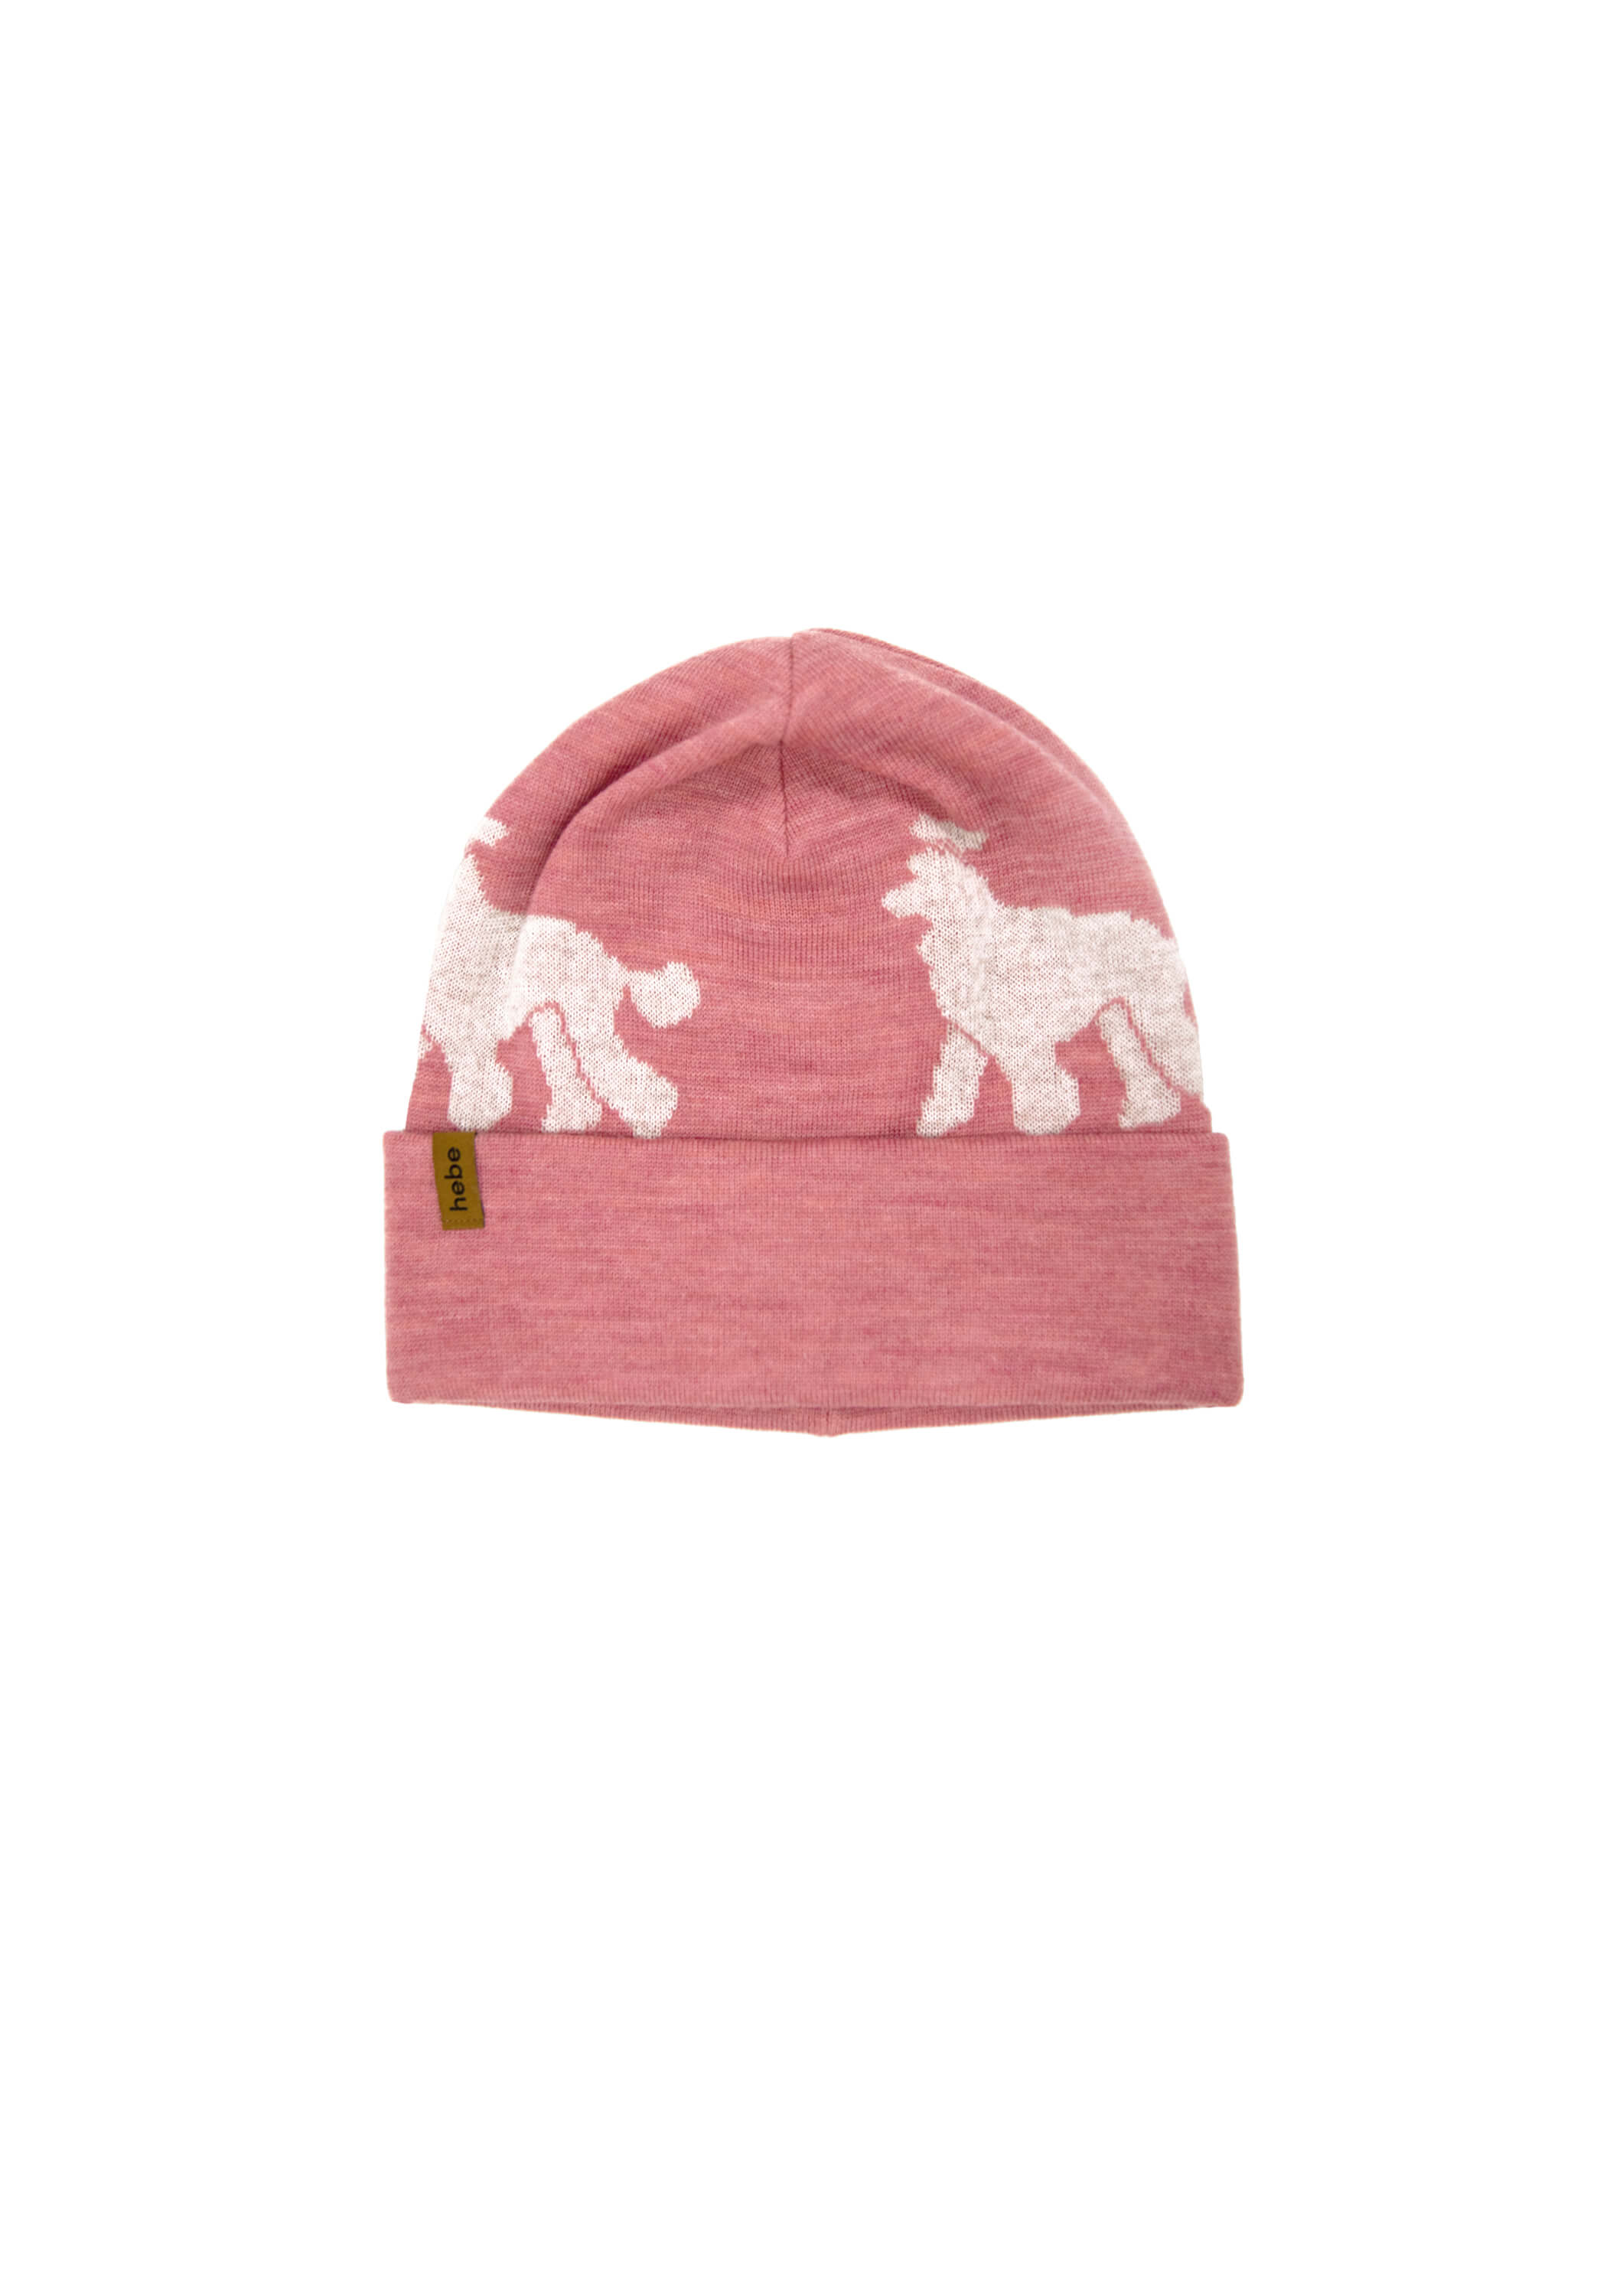 Shop pink merino wool hat for girls online in Hong Kong and Singapore at MiliMilu. Merino wool hat will keep your child warm in the winter season and also during upcoming trips. The material is gentle on the skin and doesn't cause any itching. Winter accessories for kids also make perfect Christmas presents.